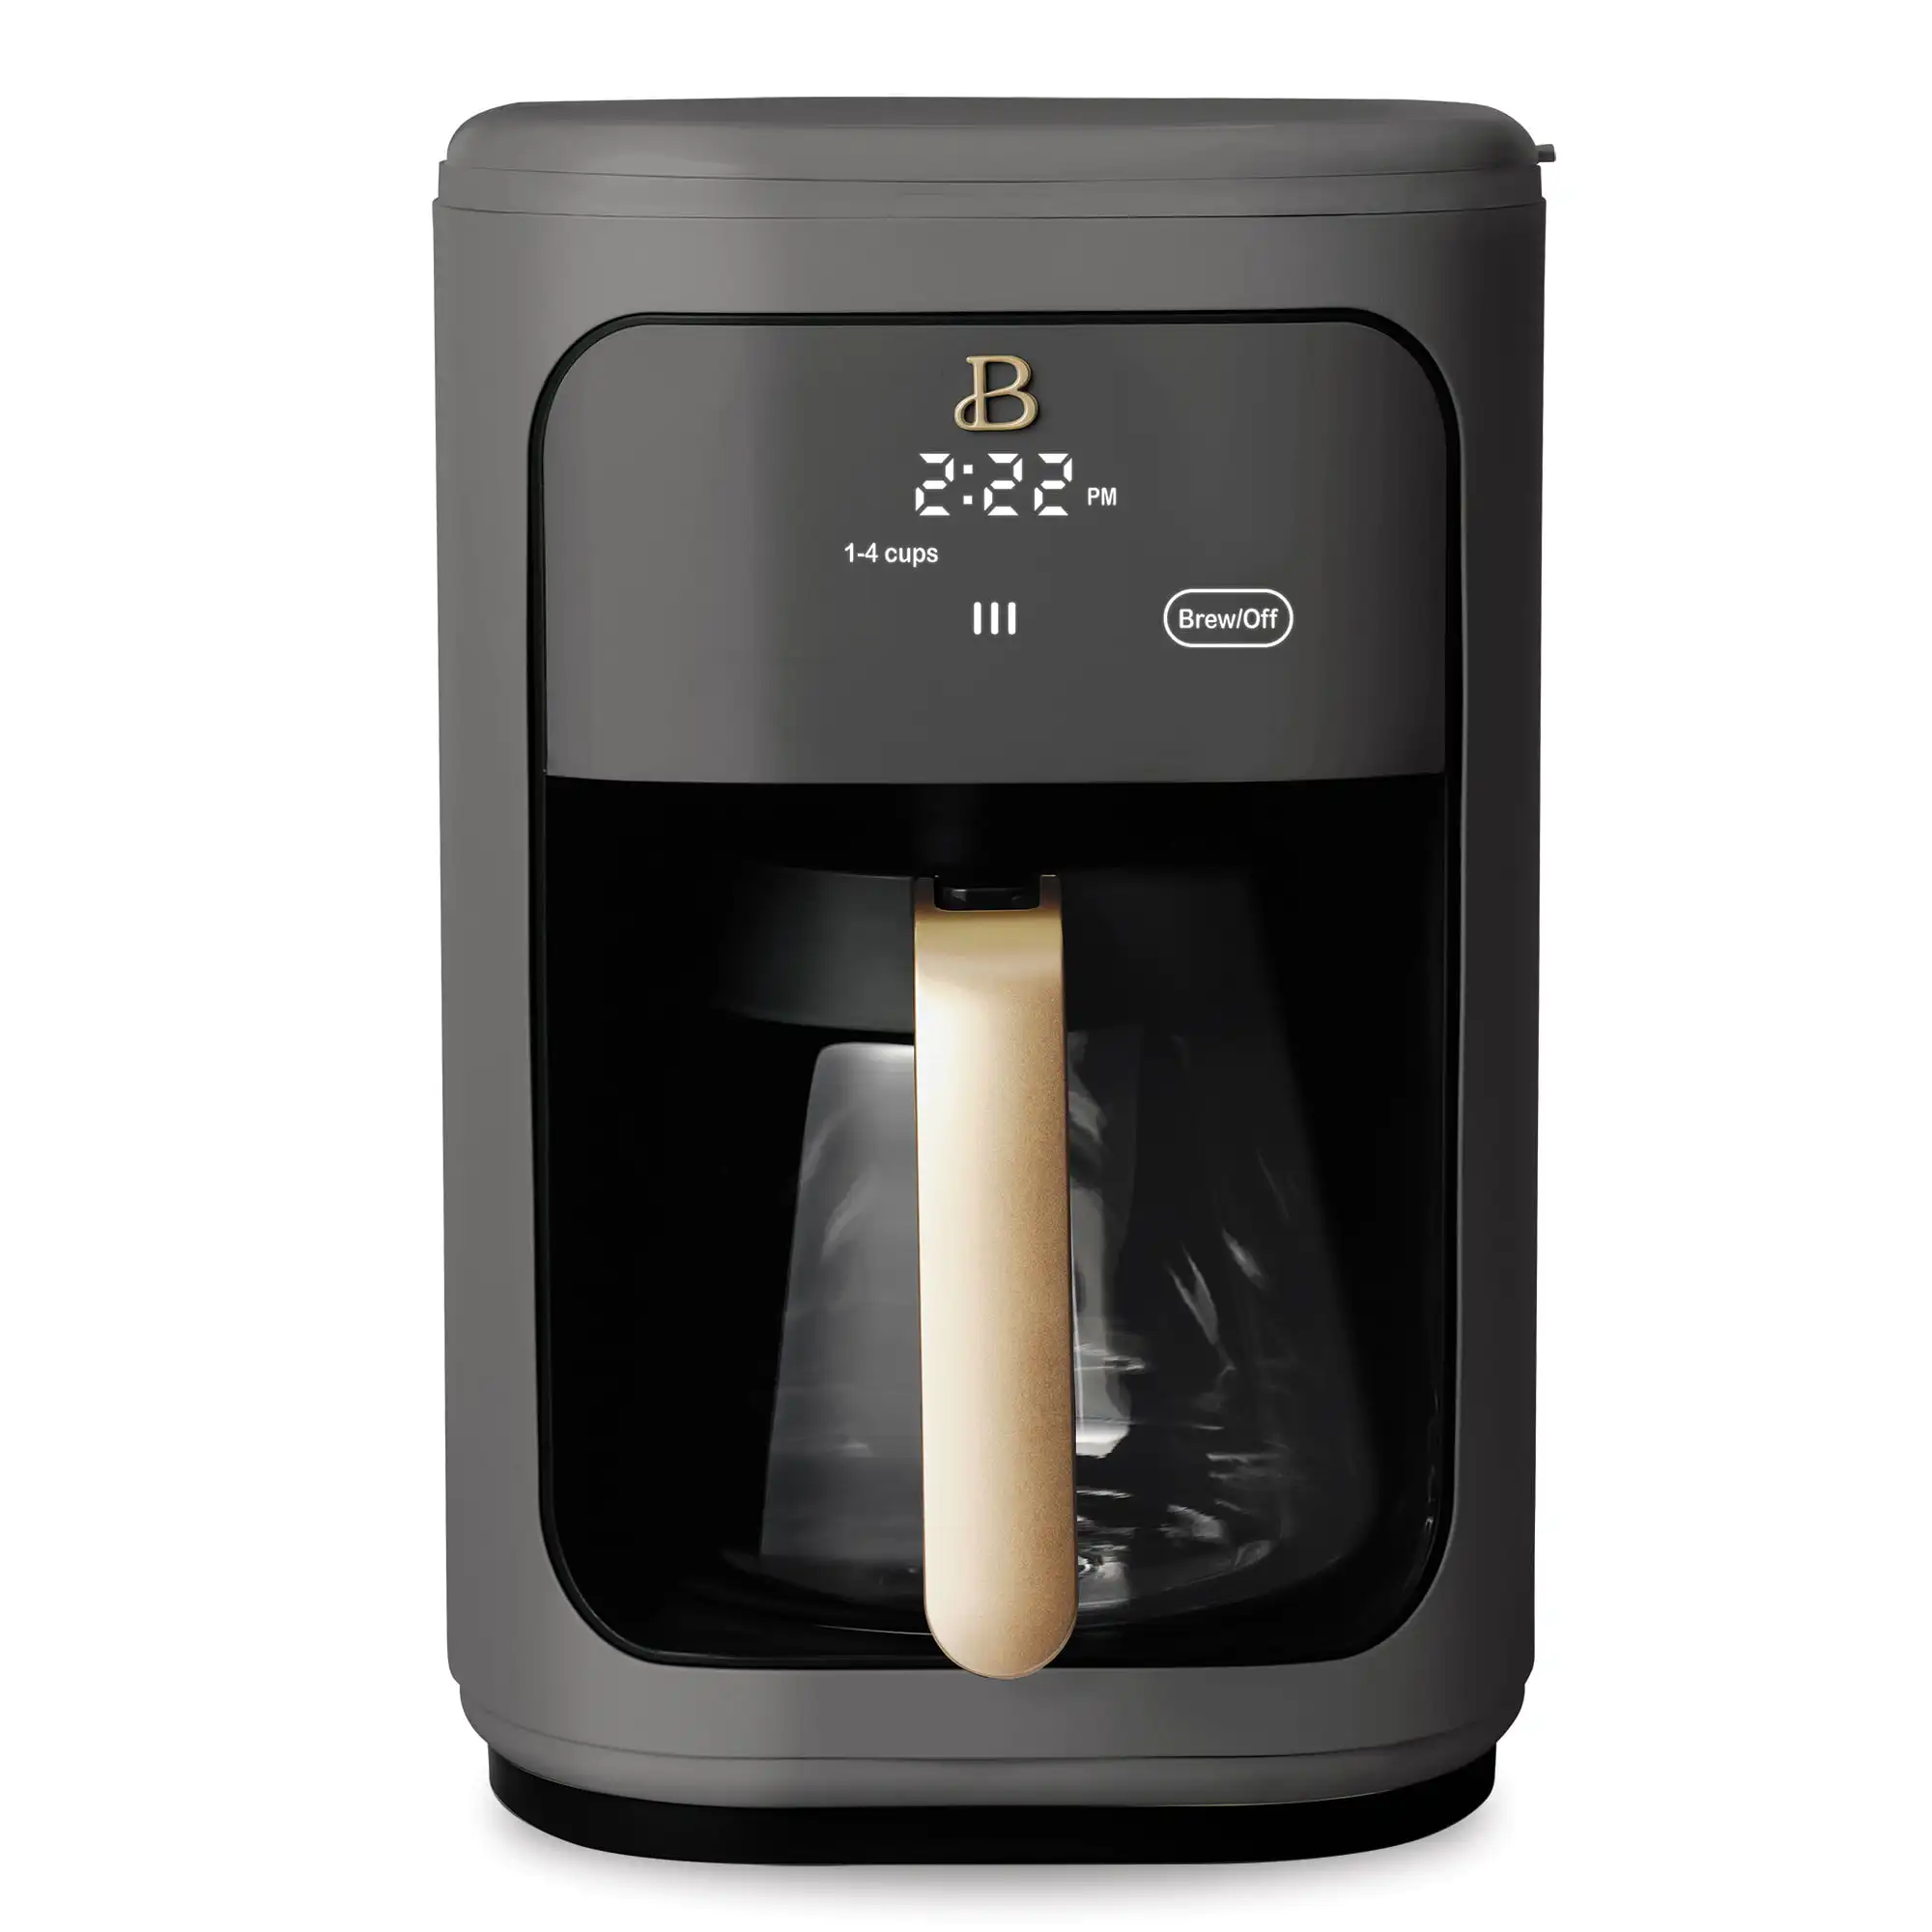 

14 Cup Programmable Touchscreen Coffee Maker, Oyster Grey by Drew Barrymore